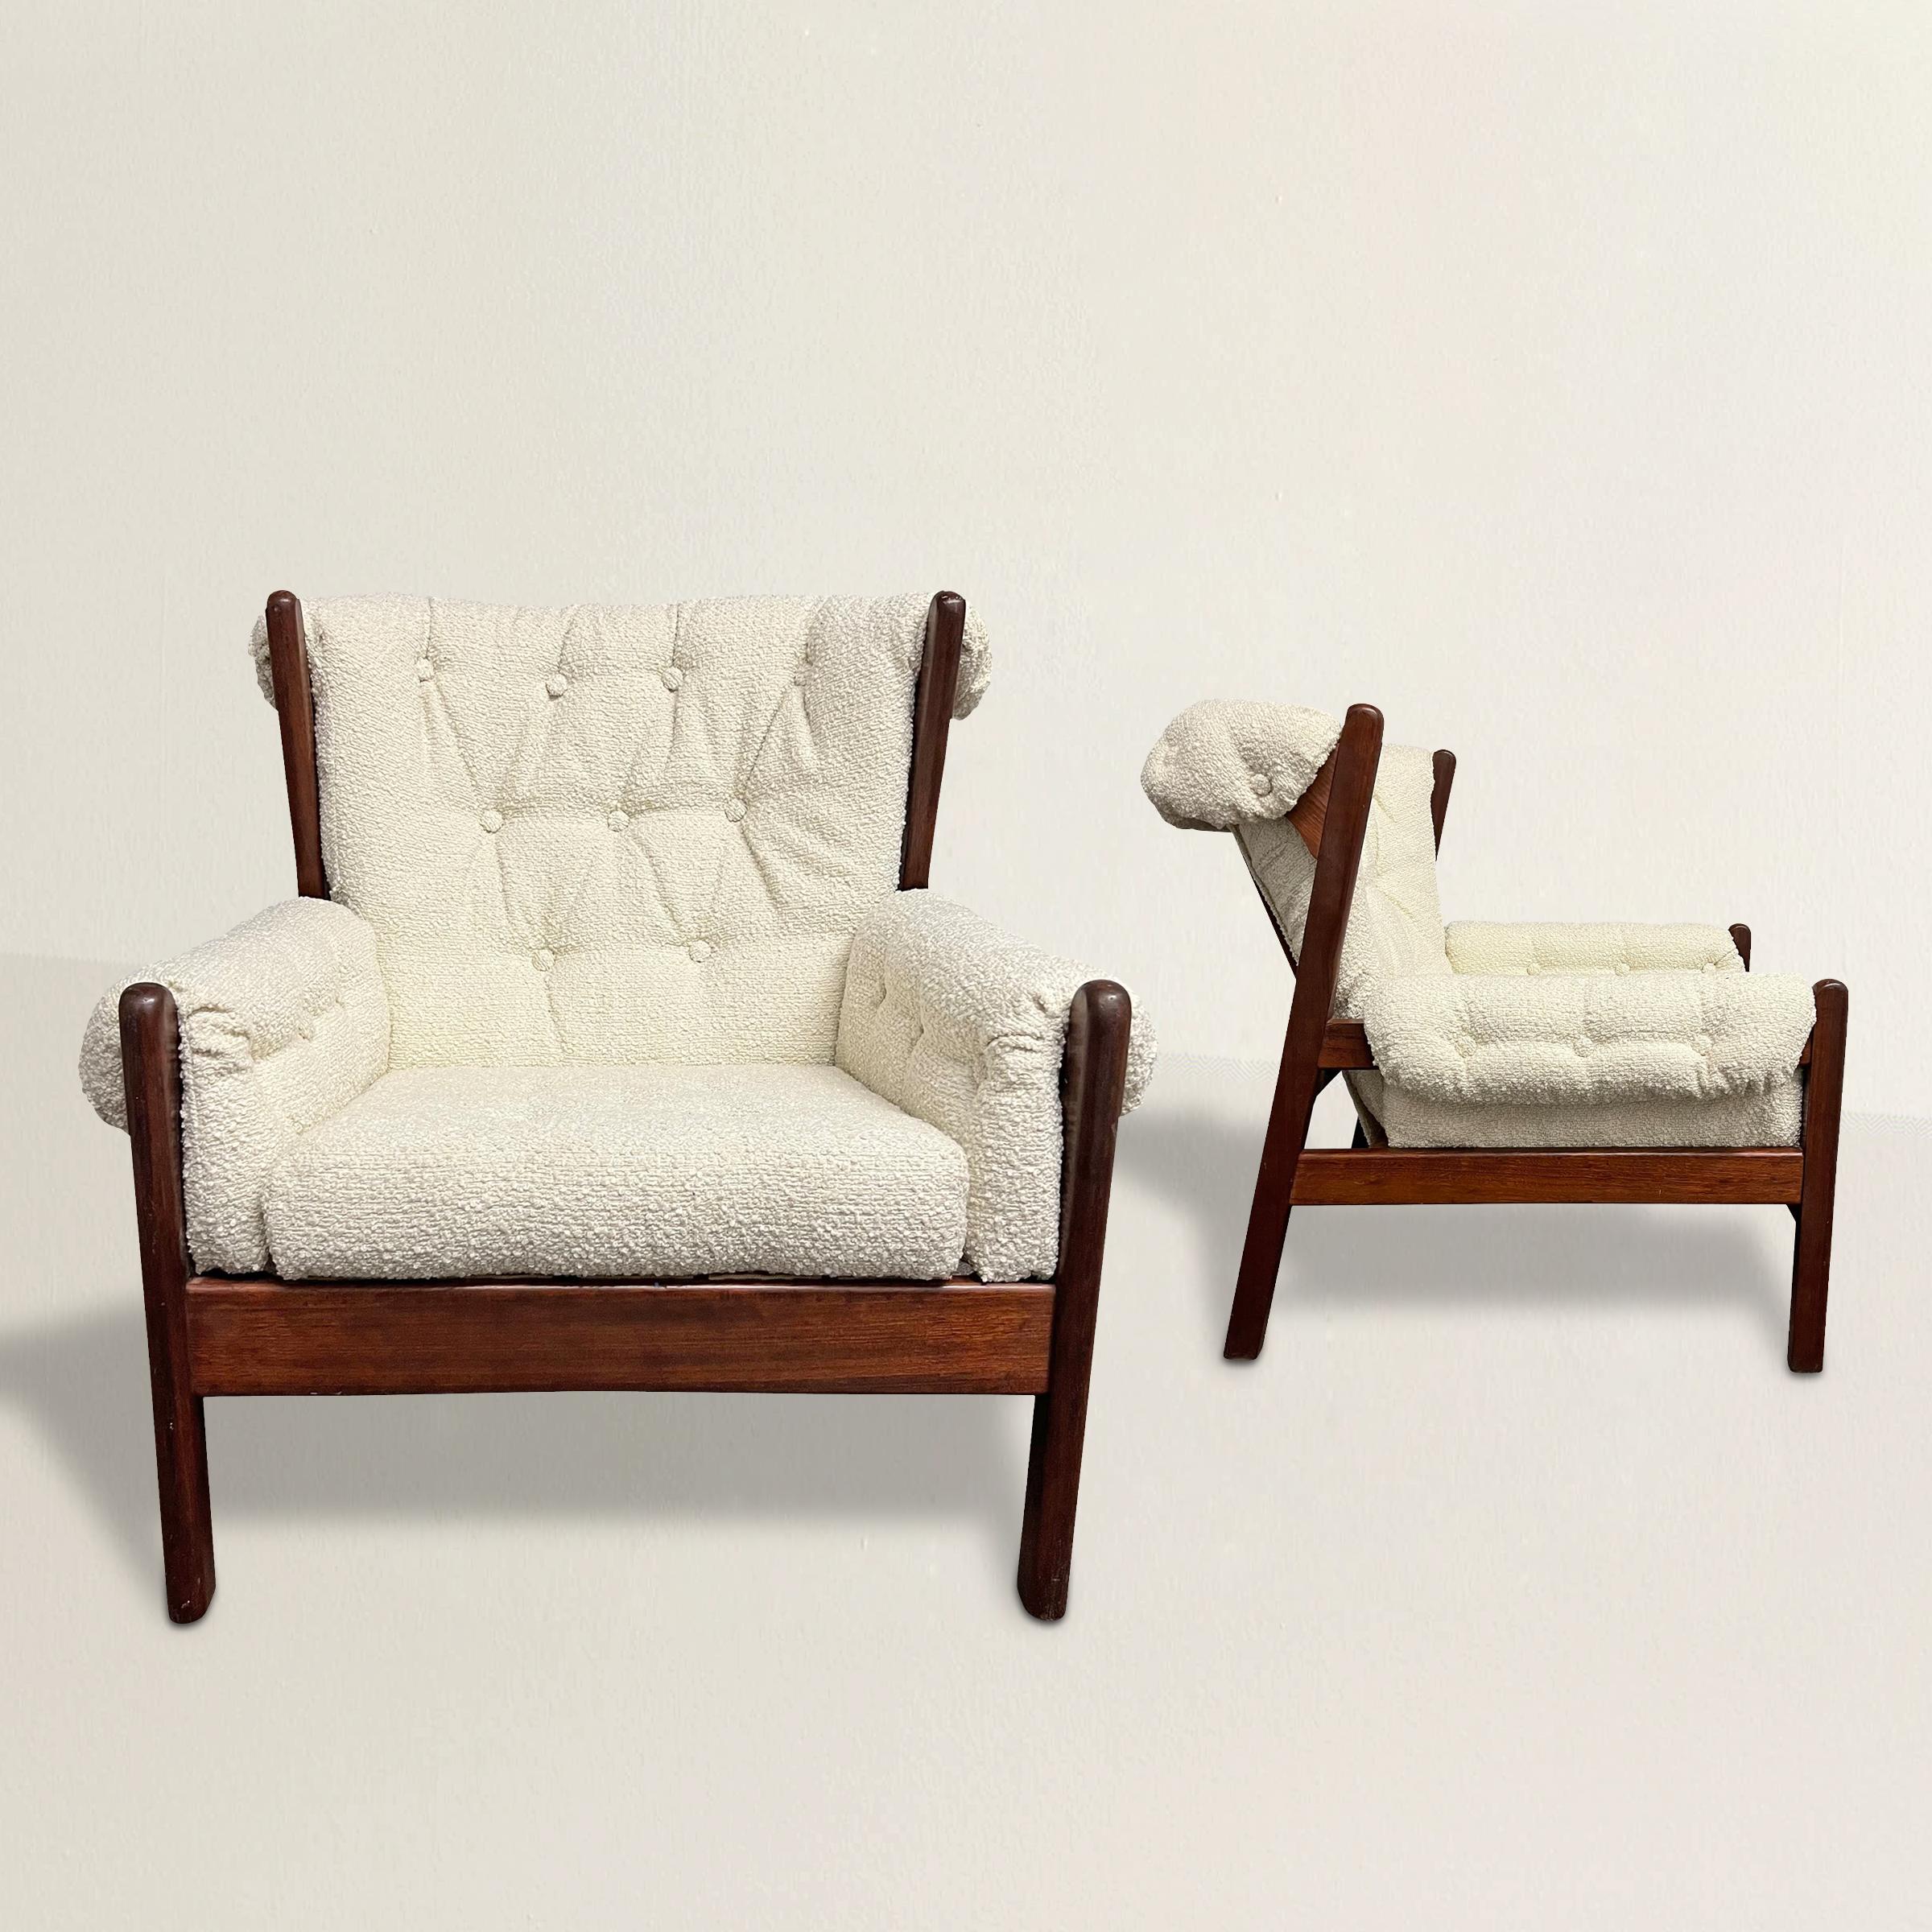 Experience the pinnacle of French modernist design with this stunning pair of mid-20th century lounge chairs, refreshed with new chunky tufted wool bouclé upholstery. These chairs epitomize modernist aesthetics with their sleek lines, creating a